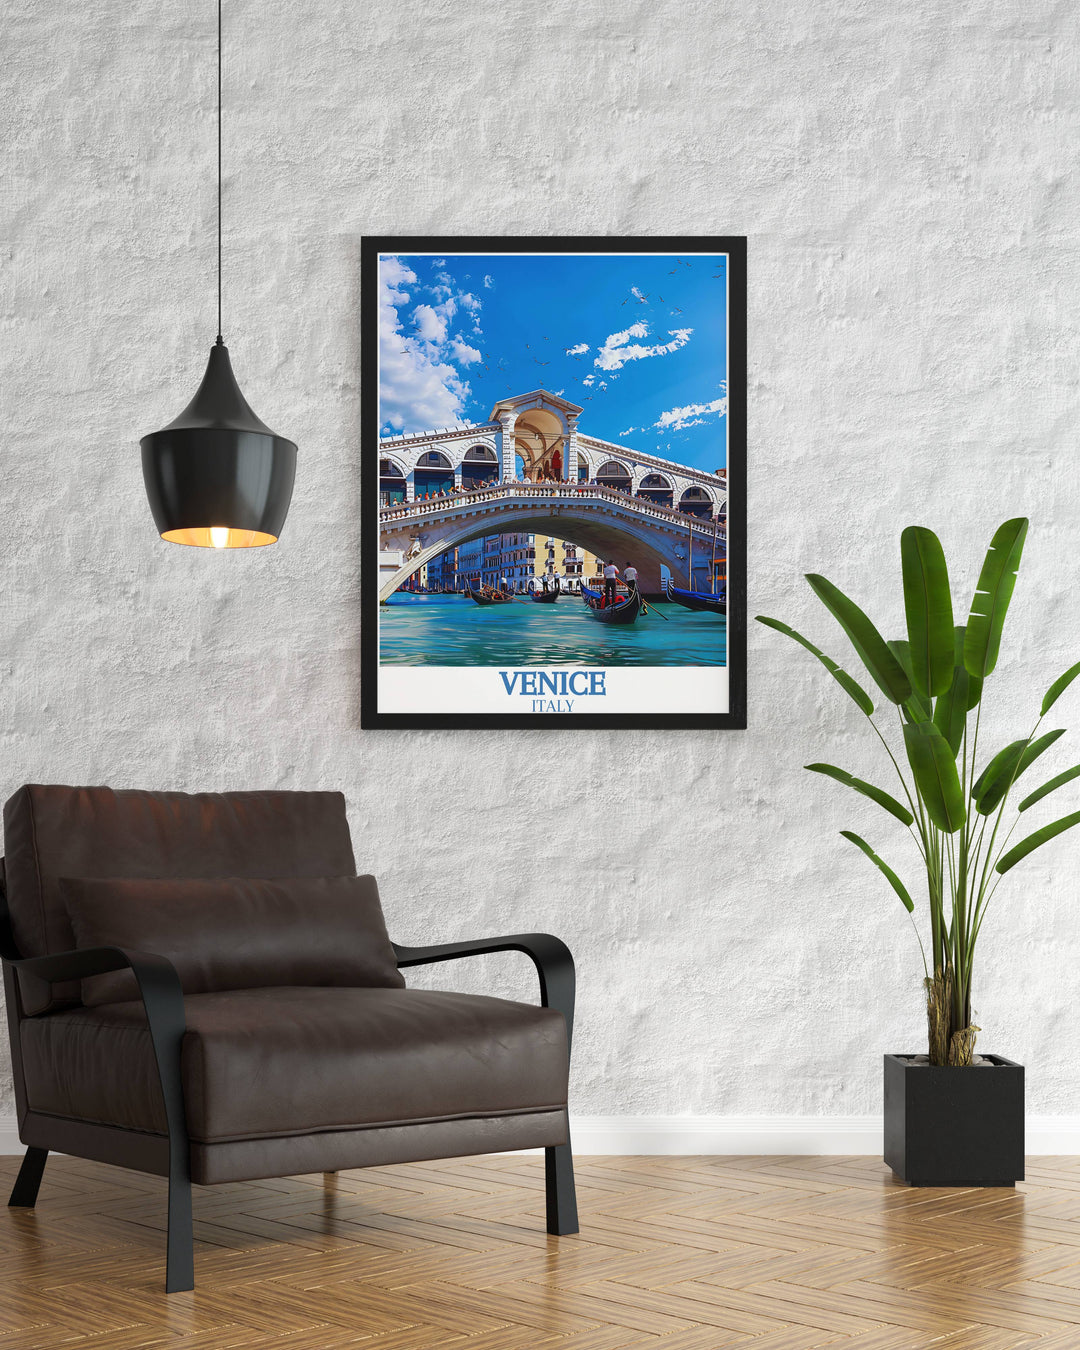 Travel poster featuring the Grand Canal in Venice with intricate details and vivid colors capturing the essence of Italy